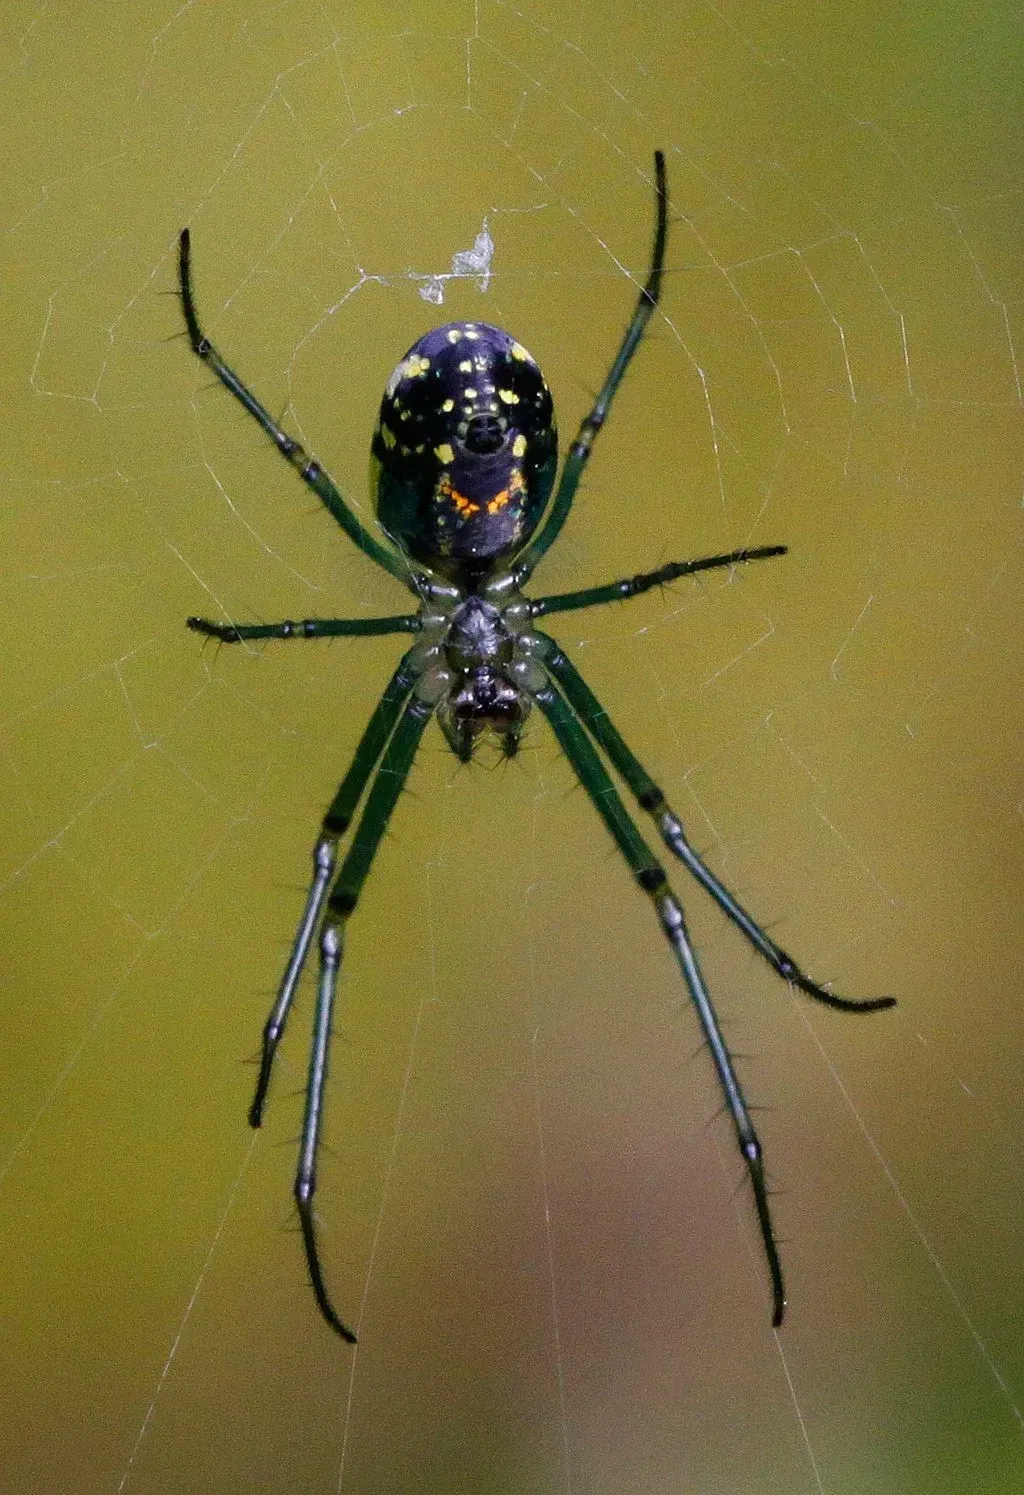 Venusta orchard orb-weaver facts about their horizontal webs are interesting.